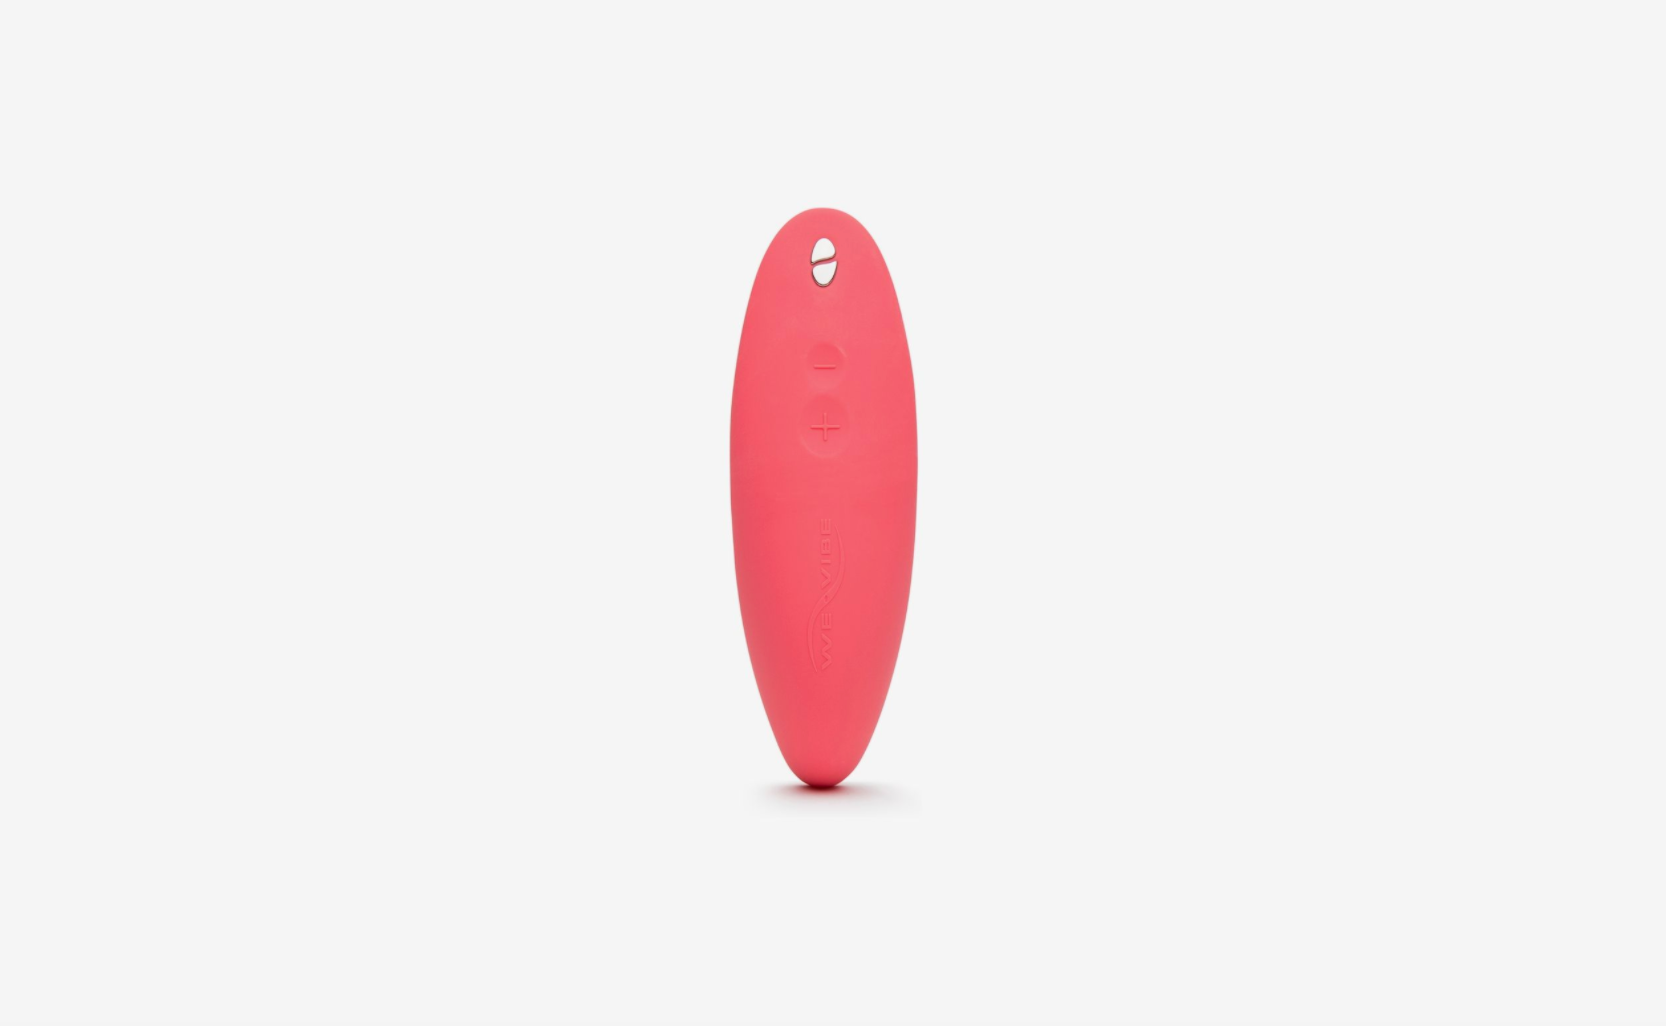 Rumored Buzz on The 10 Best Vibrators We've Actually Tried - Betches